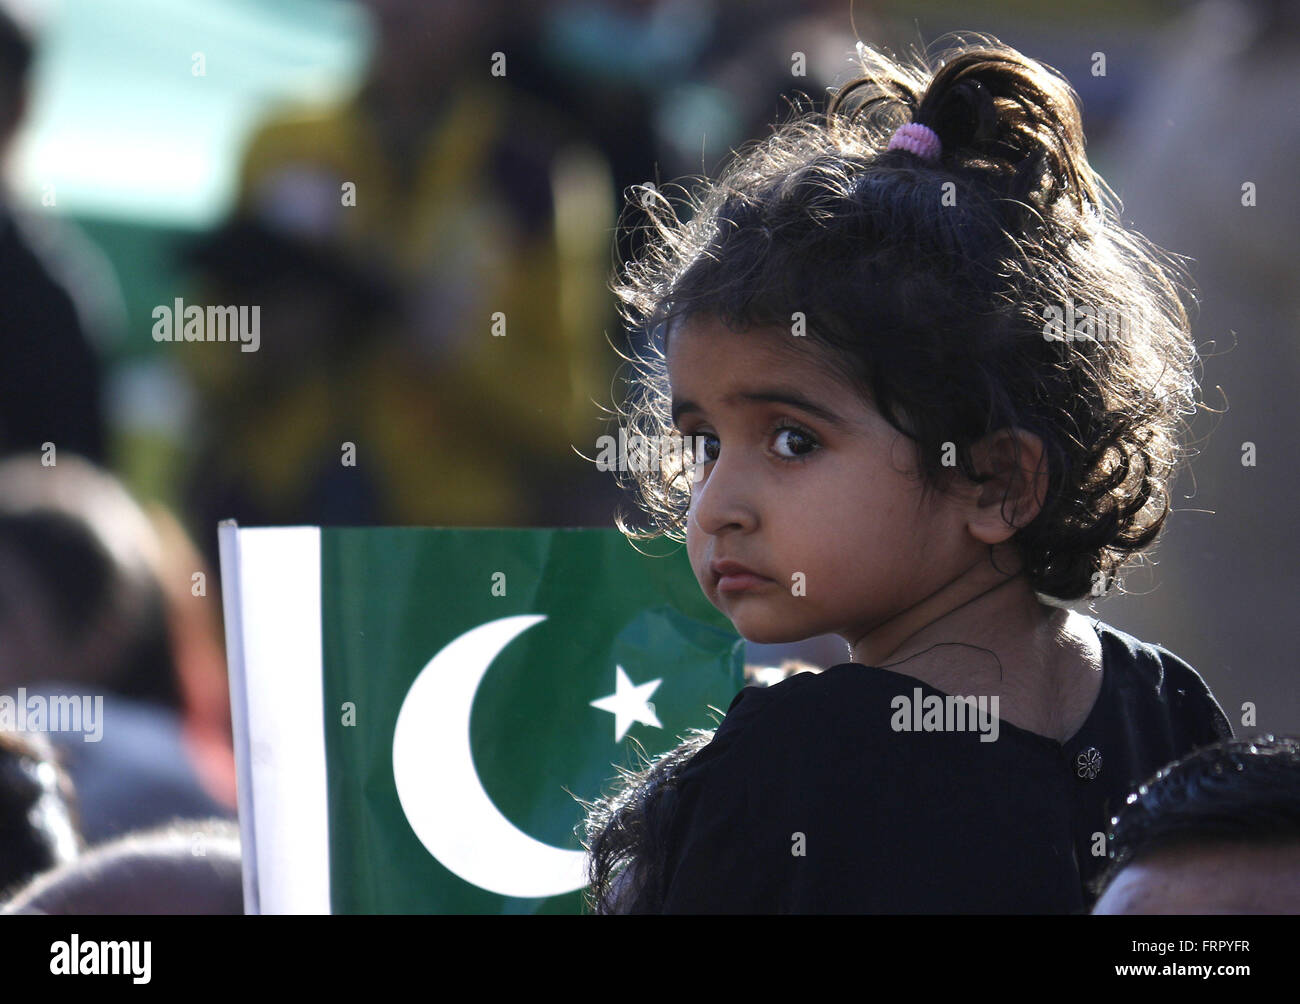 Lahore, Pakistan. 23rd Mar, 2016. Pakistani people celebrating Pakistan Day in Lahore. Pakistan celebrates its National Day to commemorate the adoption of the 1940 resolution (also known as the Pakistan or Lahore resolution) demanding a separate state for the Muslims of British-ruled India. Credit:  Rana Sajid Hussain/Pacific Press/Alamy Live News Stock Photo